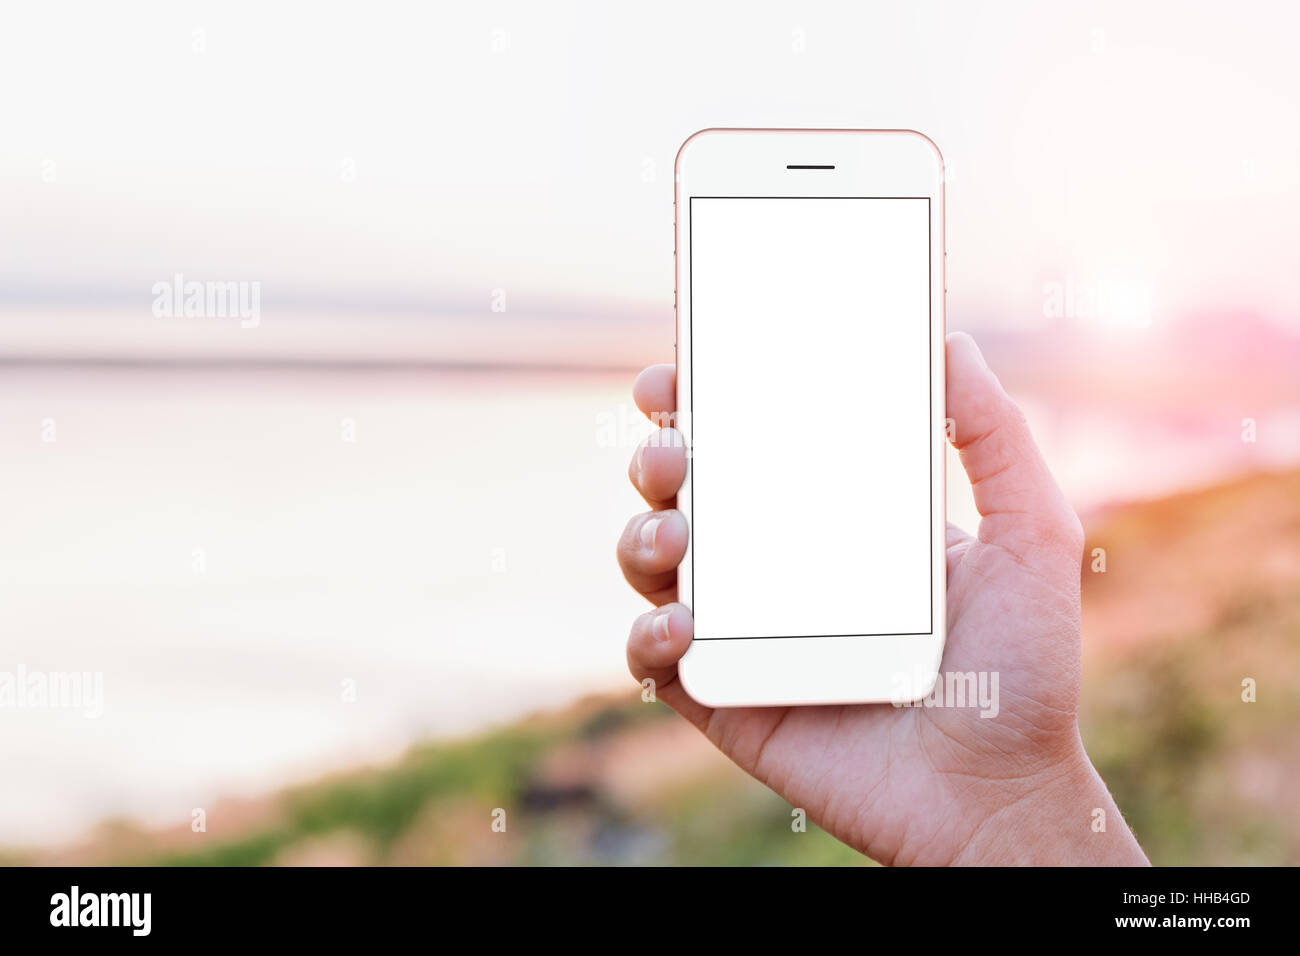 close-up hand holding phone mobile showing screen at outdoor during sunset time, mock-up new modern smartphone Stock Photo